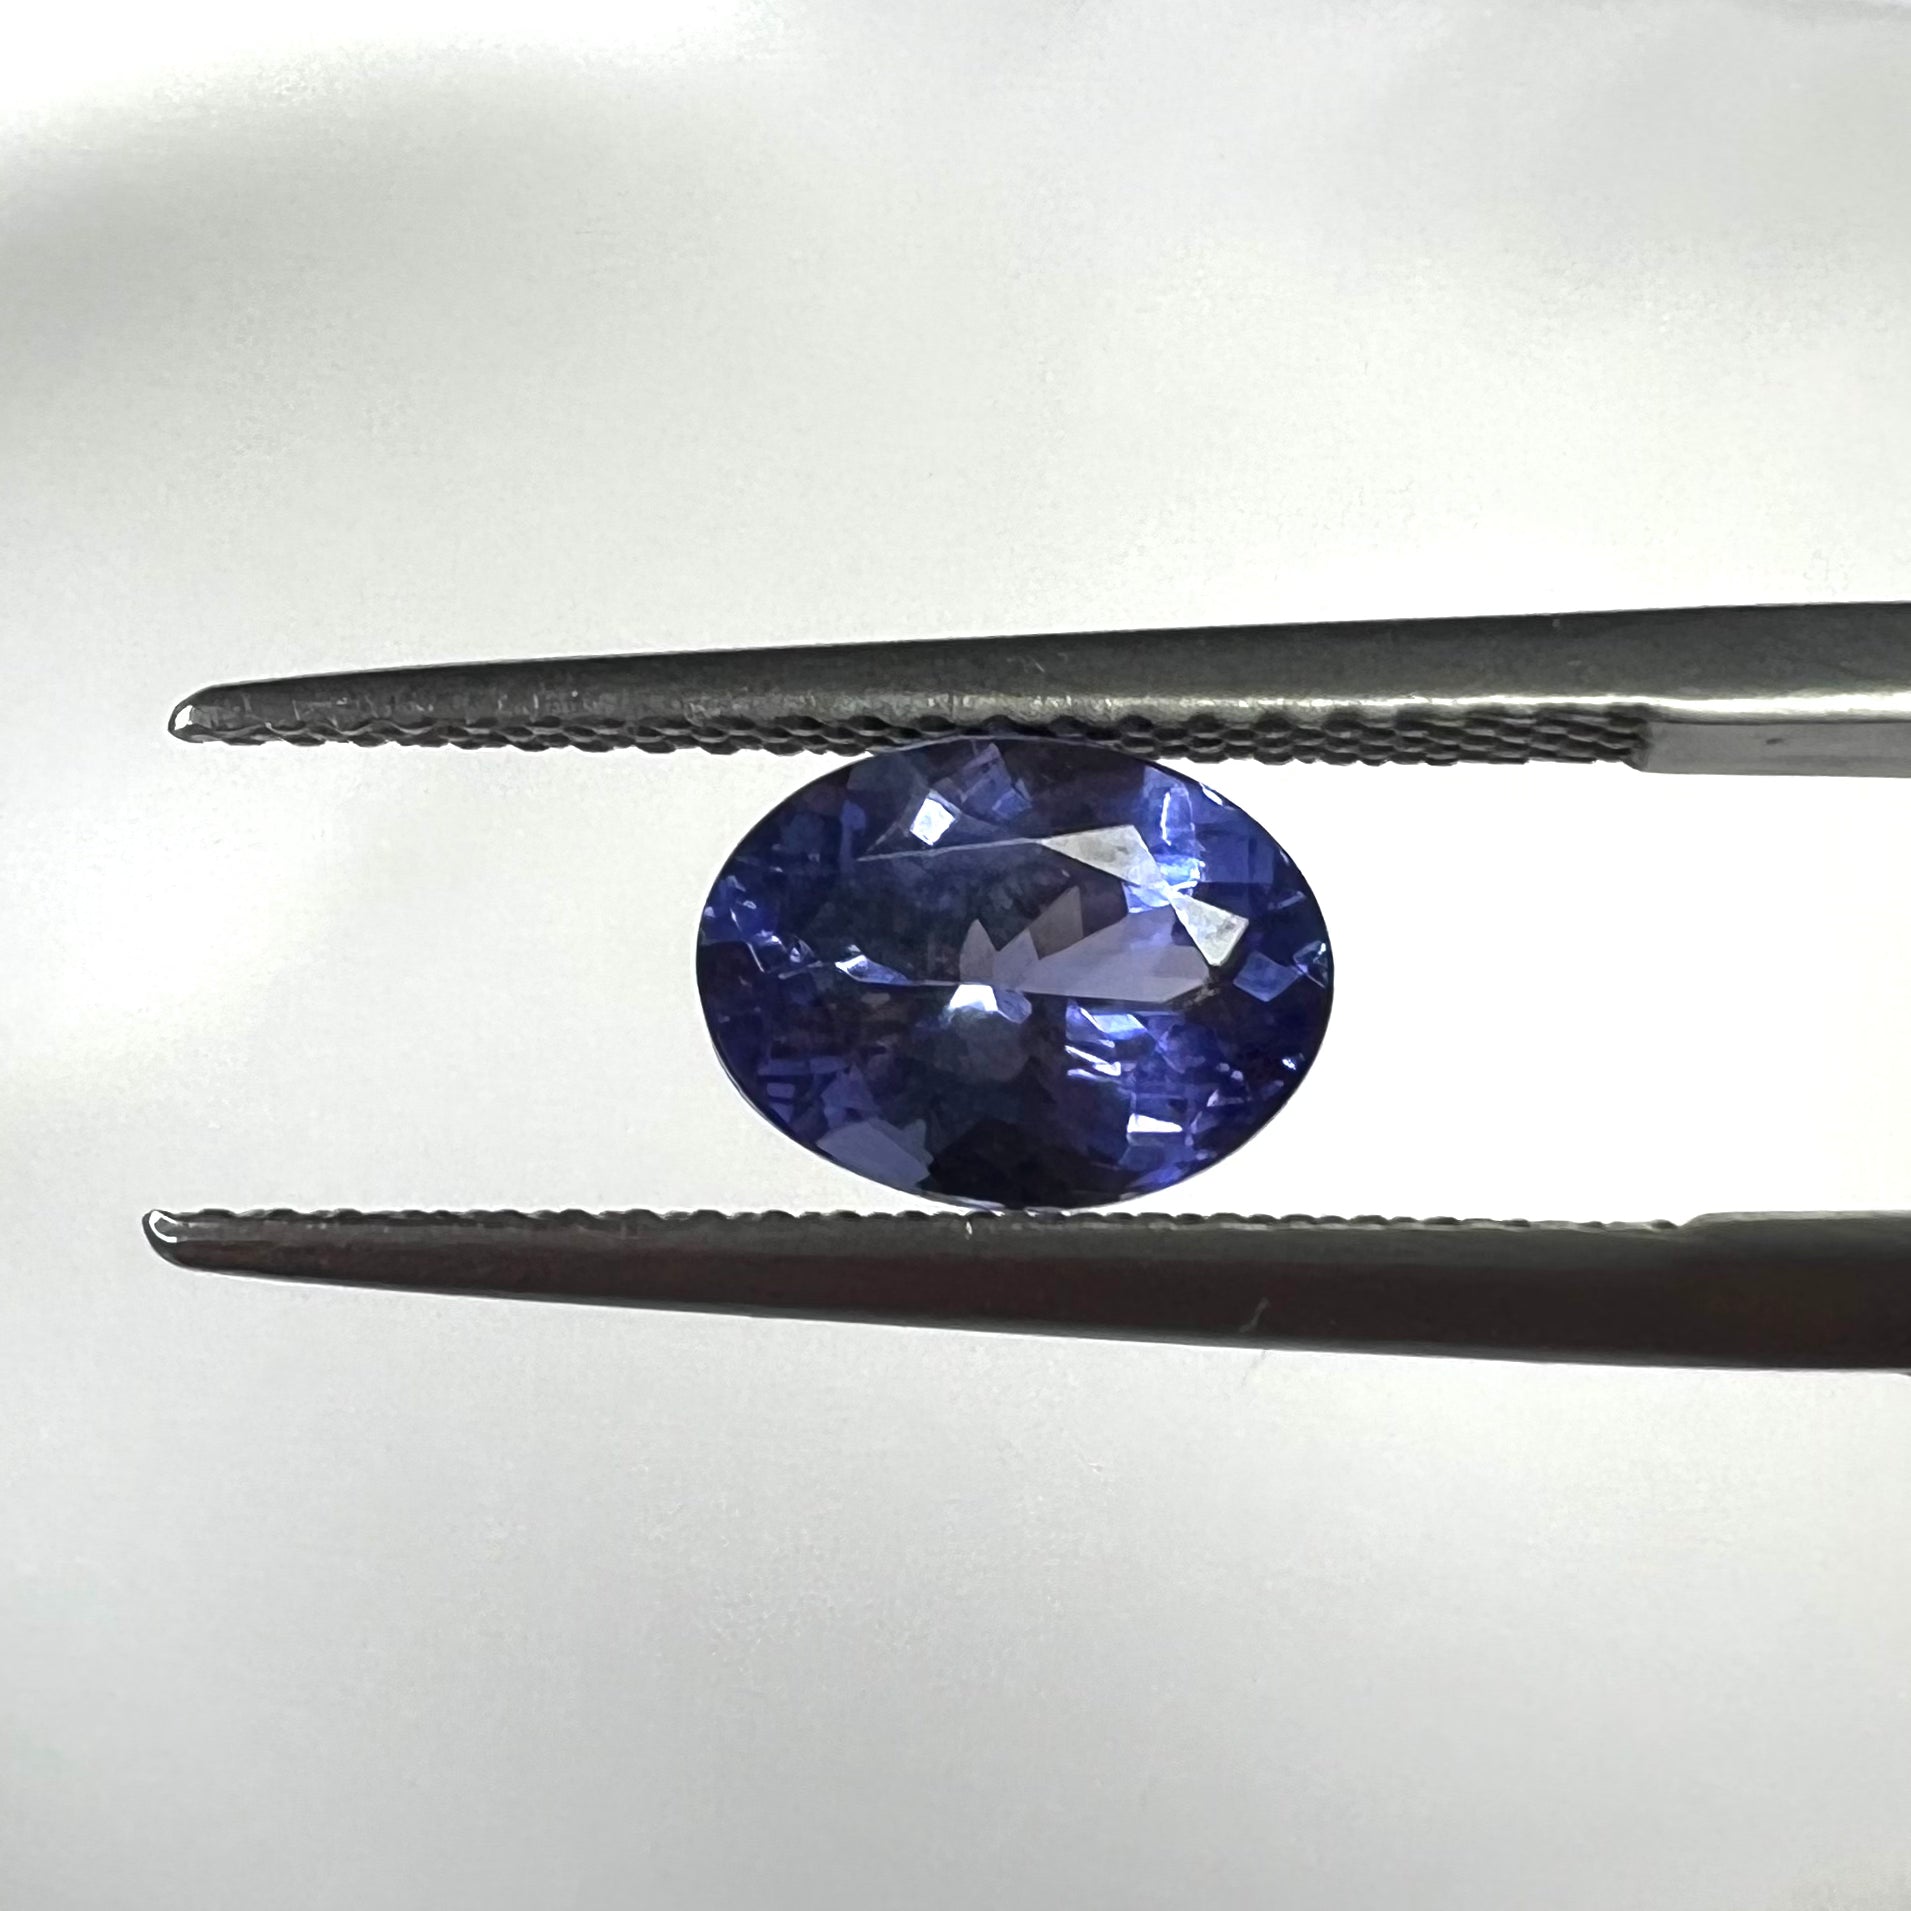 1.46CTW Loose Natural Oval Tanzanite 7.99x6.03x4.28mm Earth mined Gemstone